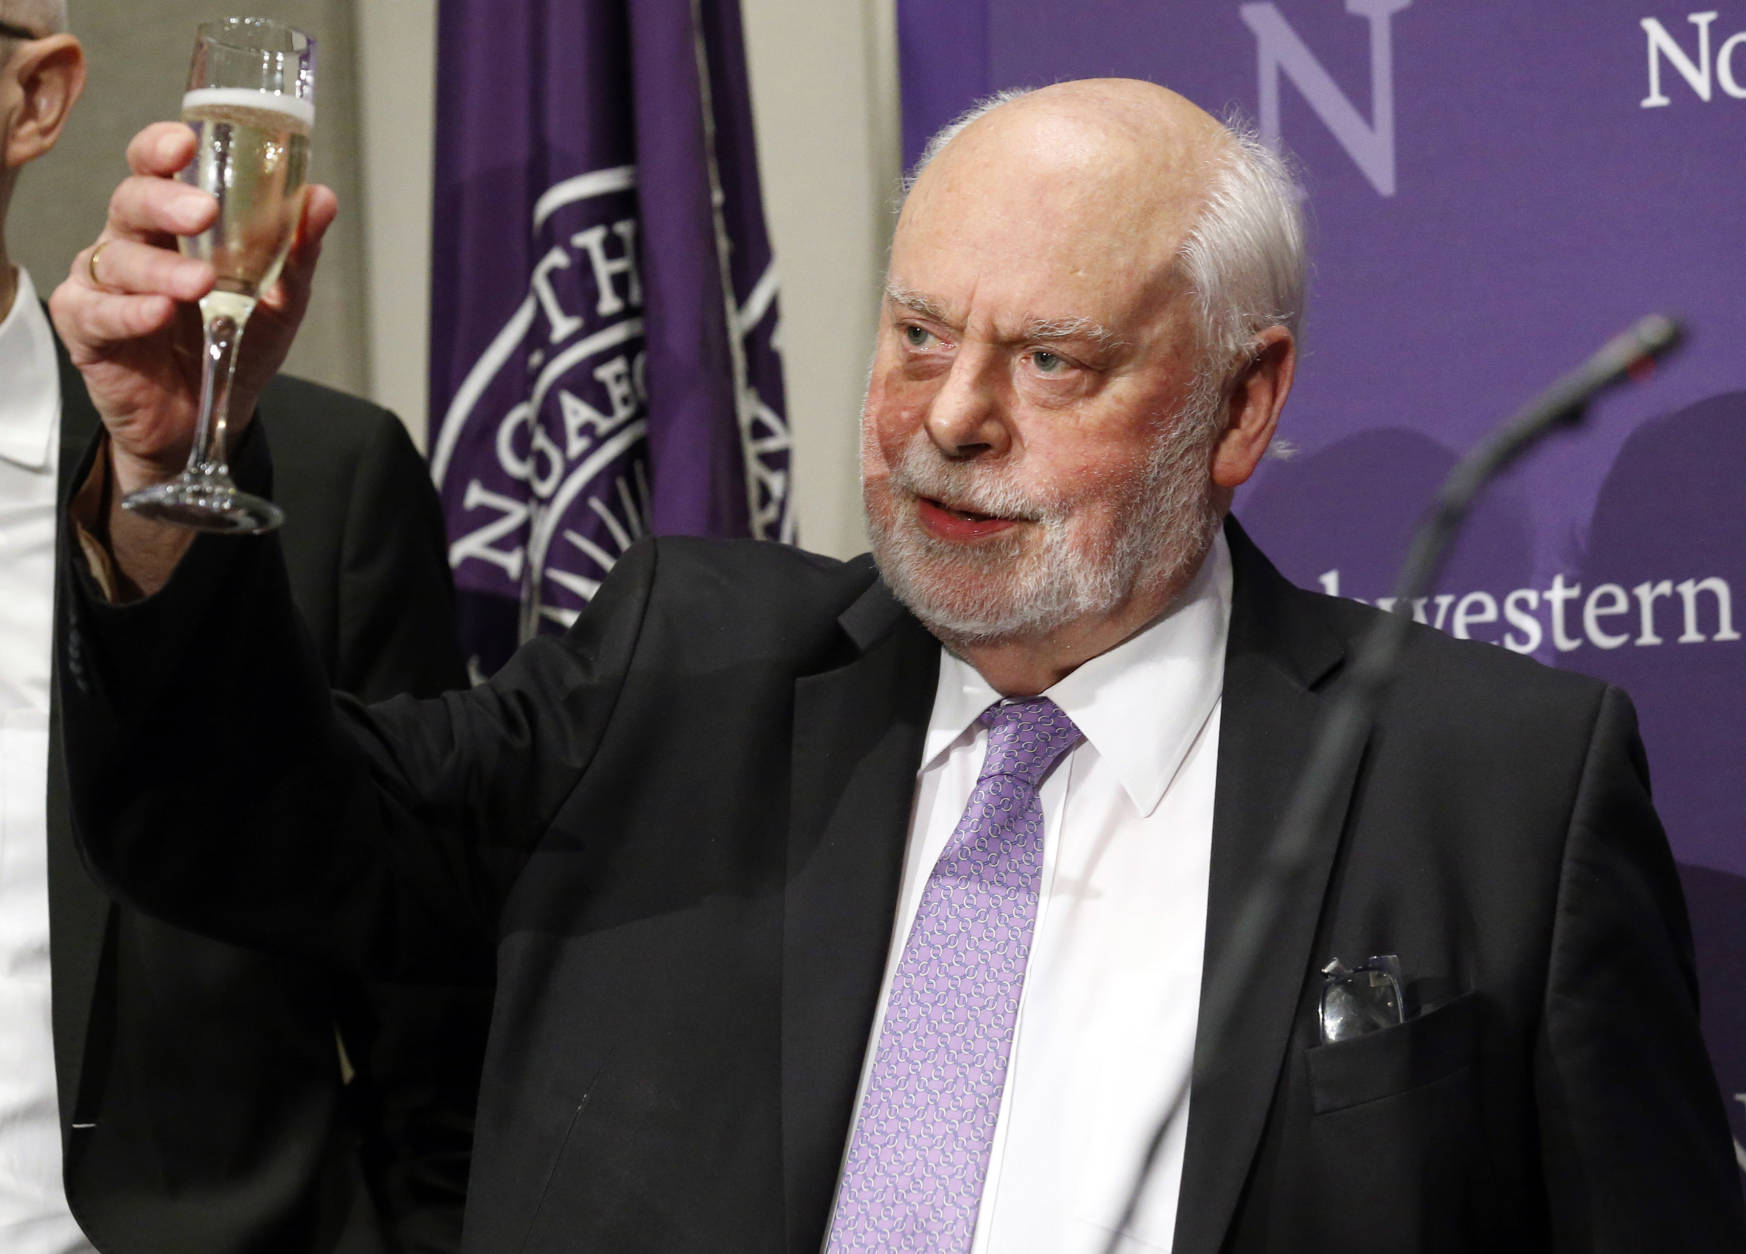 Fraser Stoddart raises his glass for a toast during a news conference at the Rebecca Crown Center at Northwestern University, in Evanston, Ill., Wednesday, Oct. 5, 2016. Stoddart, a Scottish-born chemistry professor at Northwestern University, was awarded the Nobel Prize in chemistry on Wednesday. (AP Photo/Nam Y. Huh)